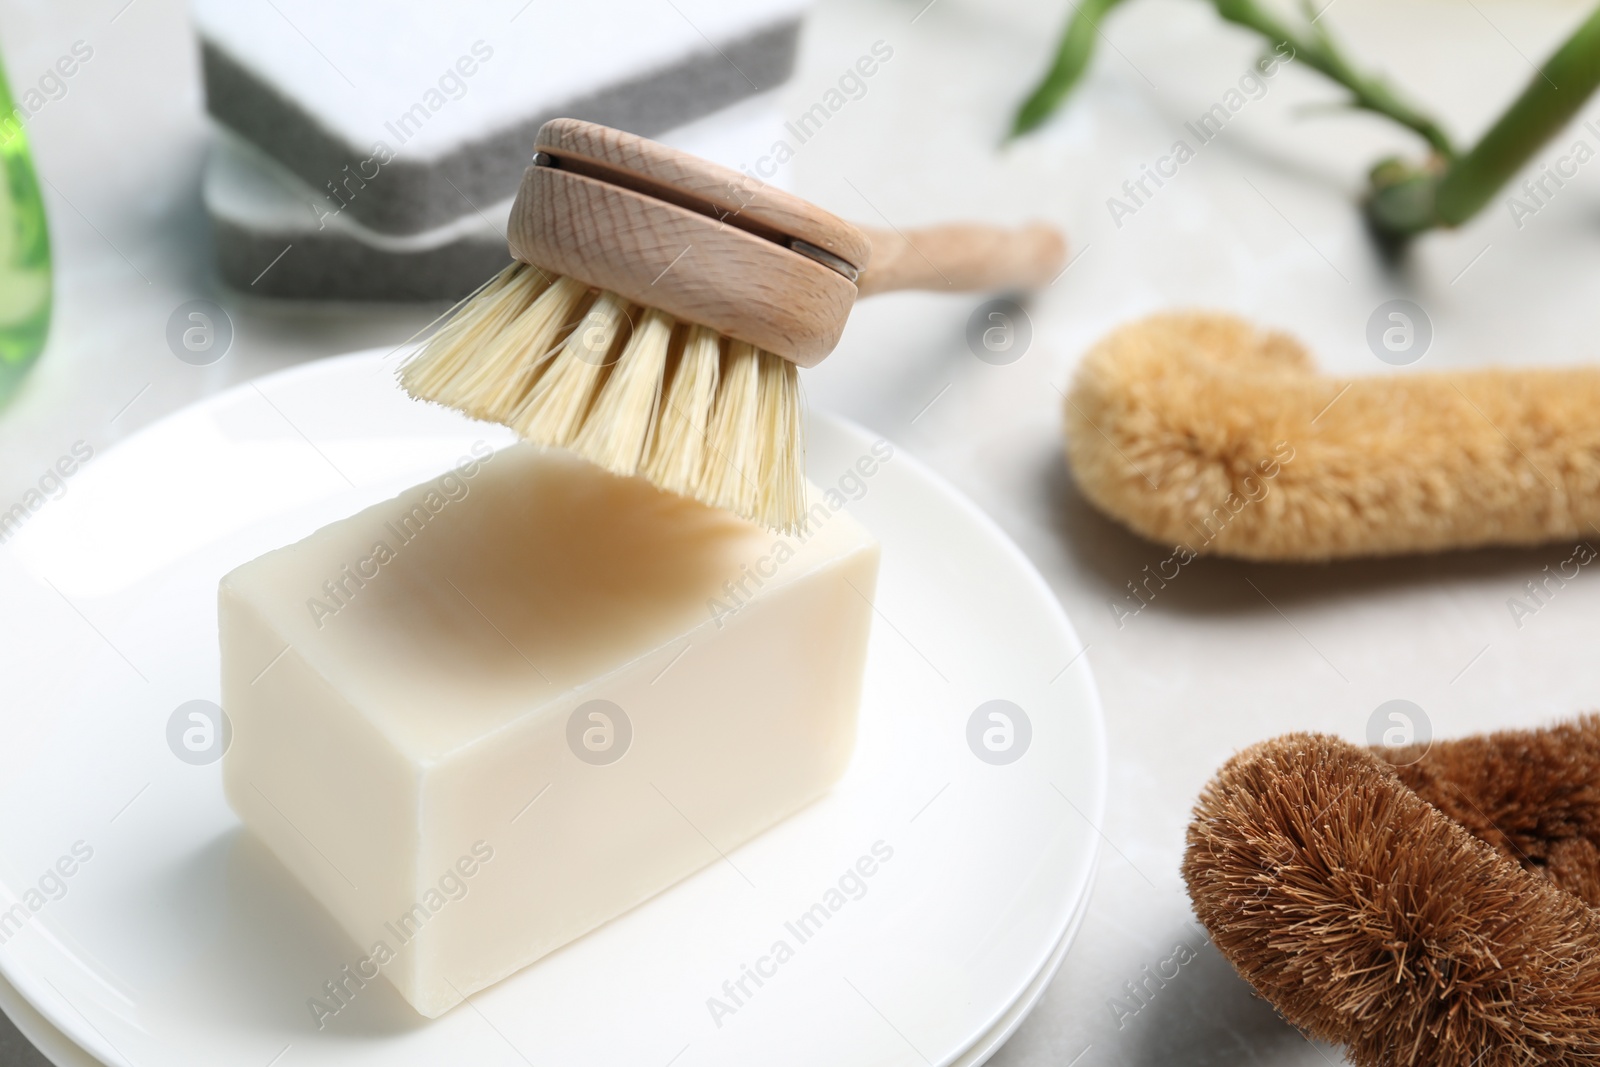 Photo of Cleaning brushes, soap bar and plates on table, closeup. Dish washing supplies